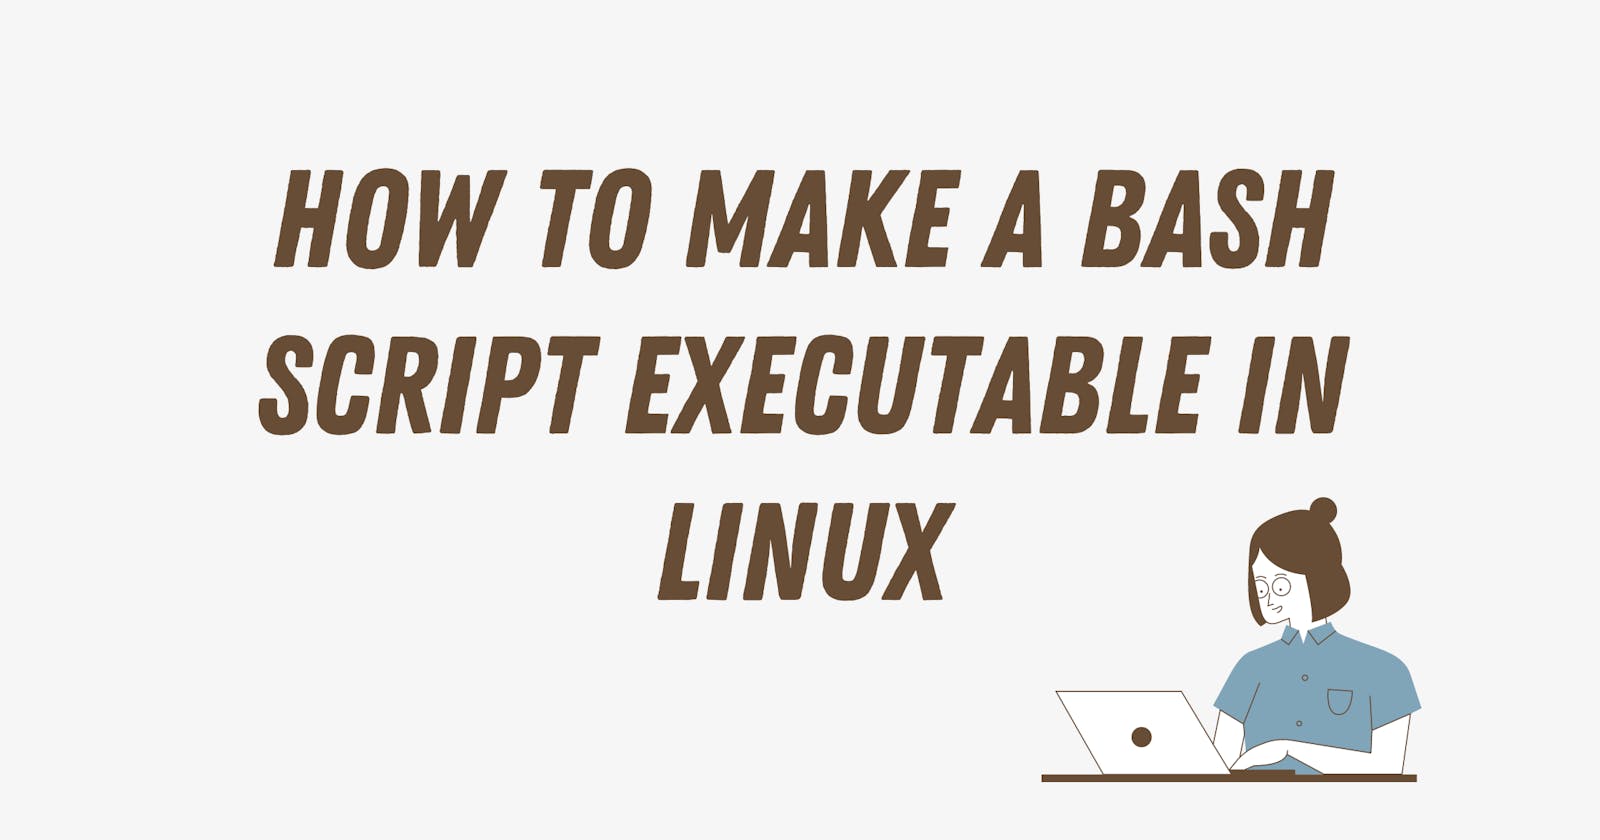 How to Make a Bash Script Executable in Linux